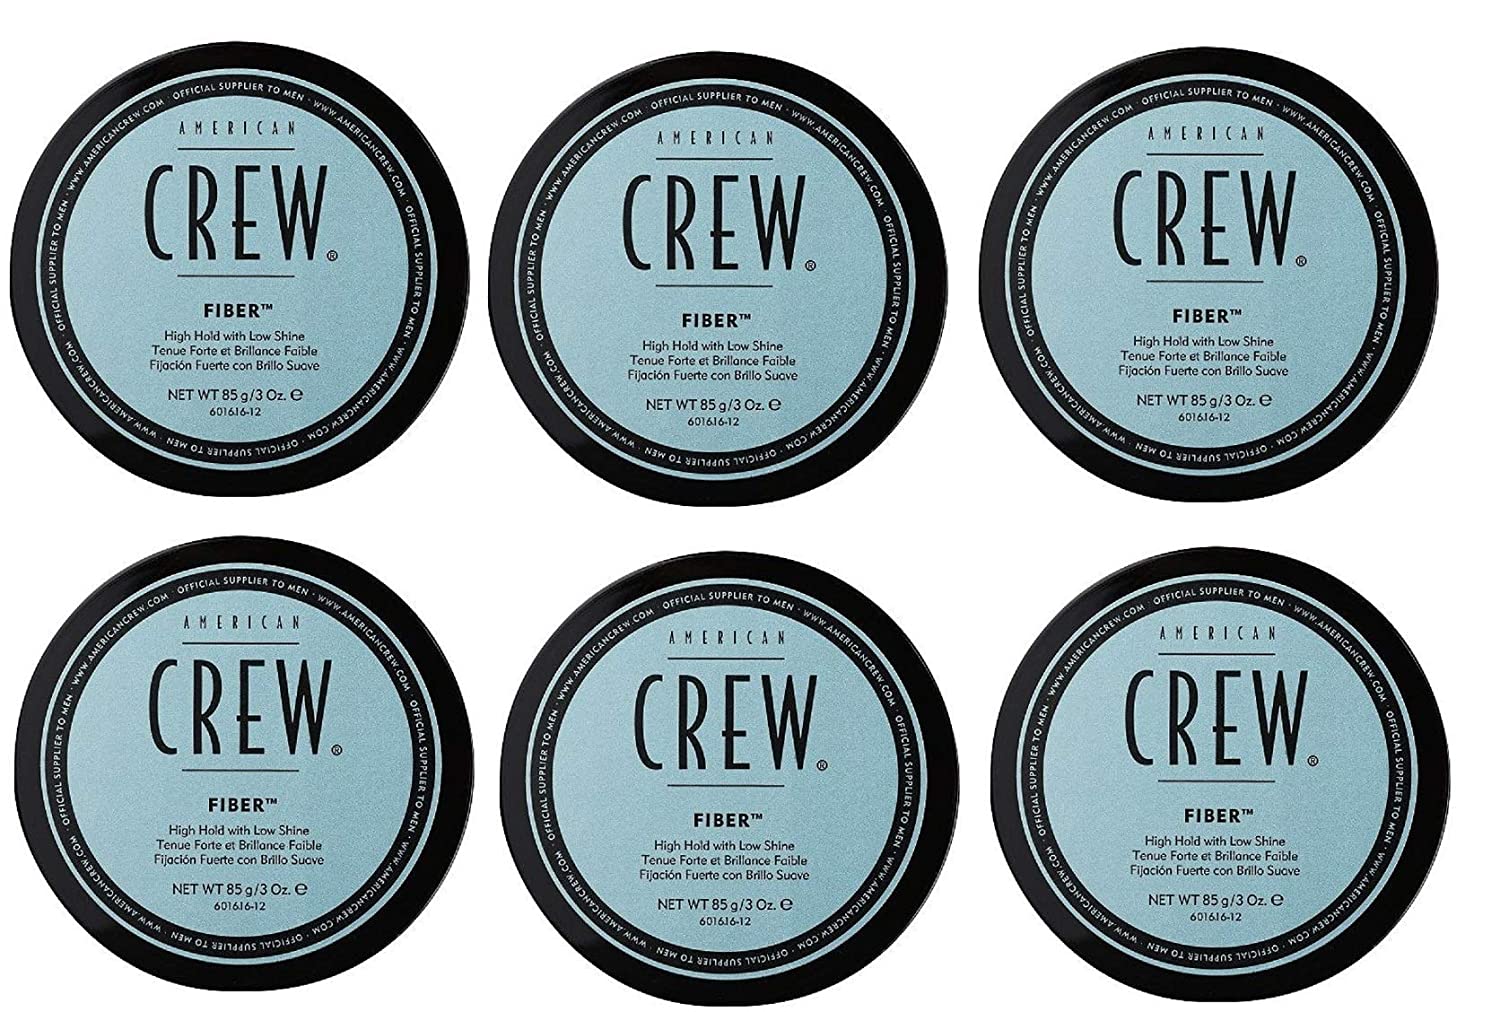 American Crew: Classic fibre, 3 oz (pack of 6) by American Crew